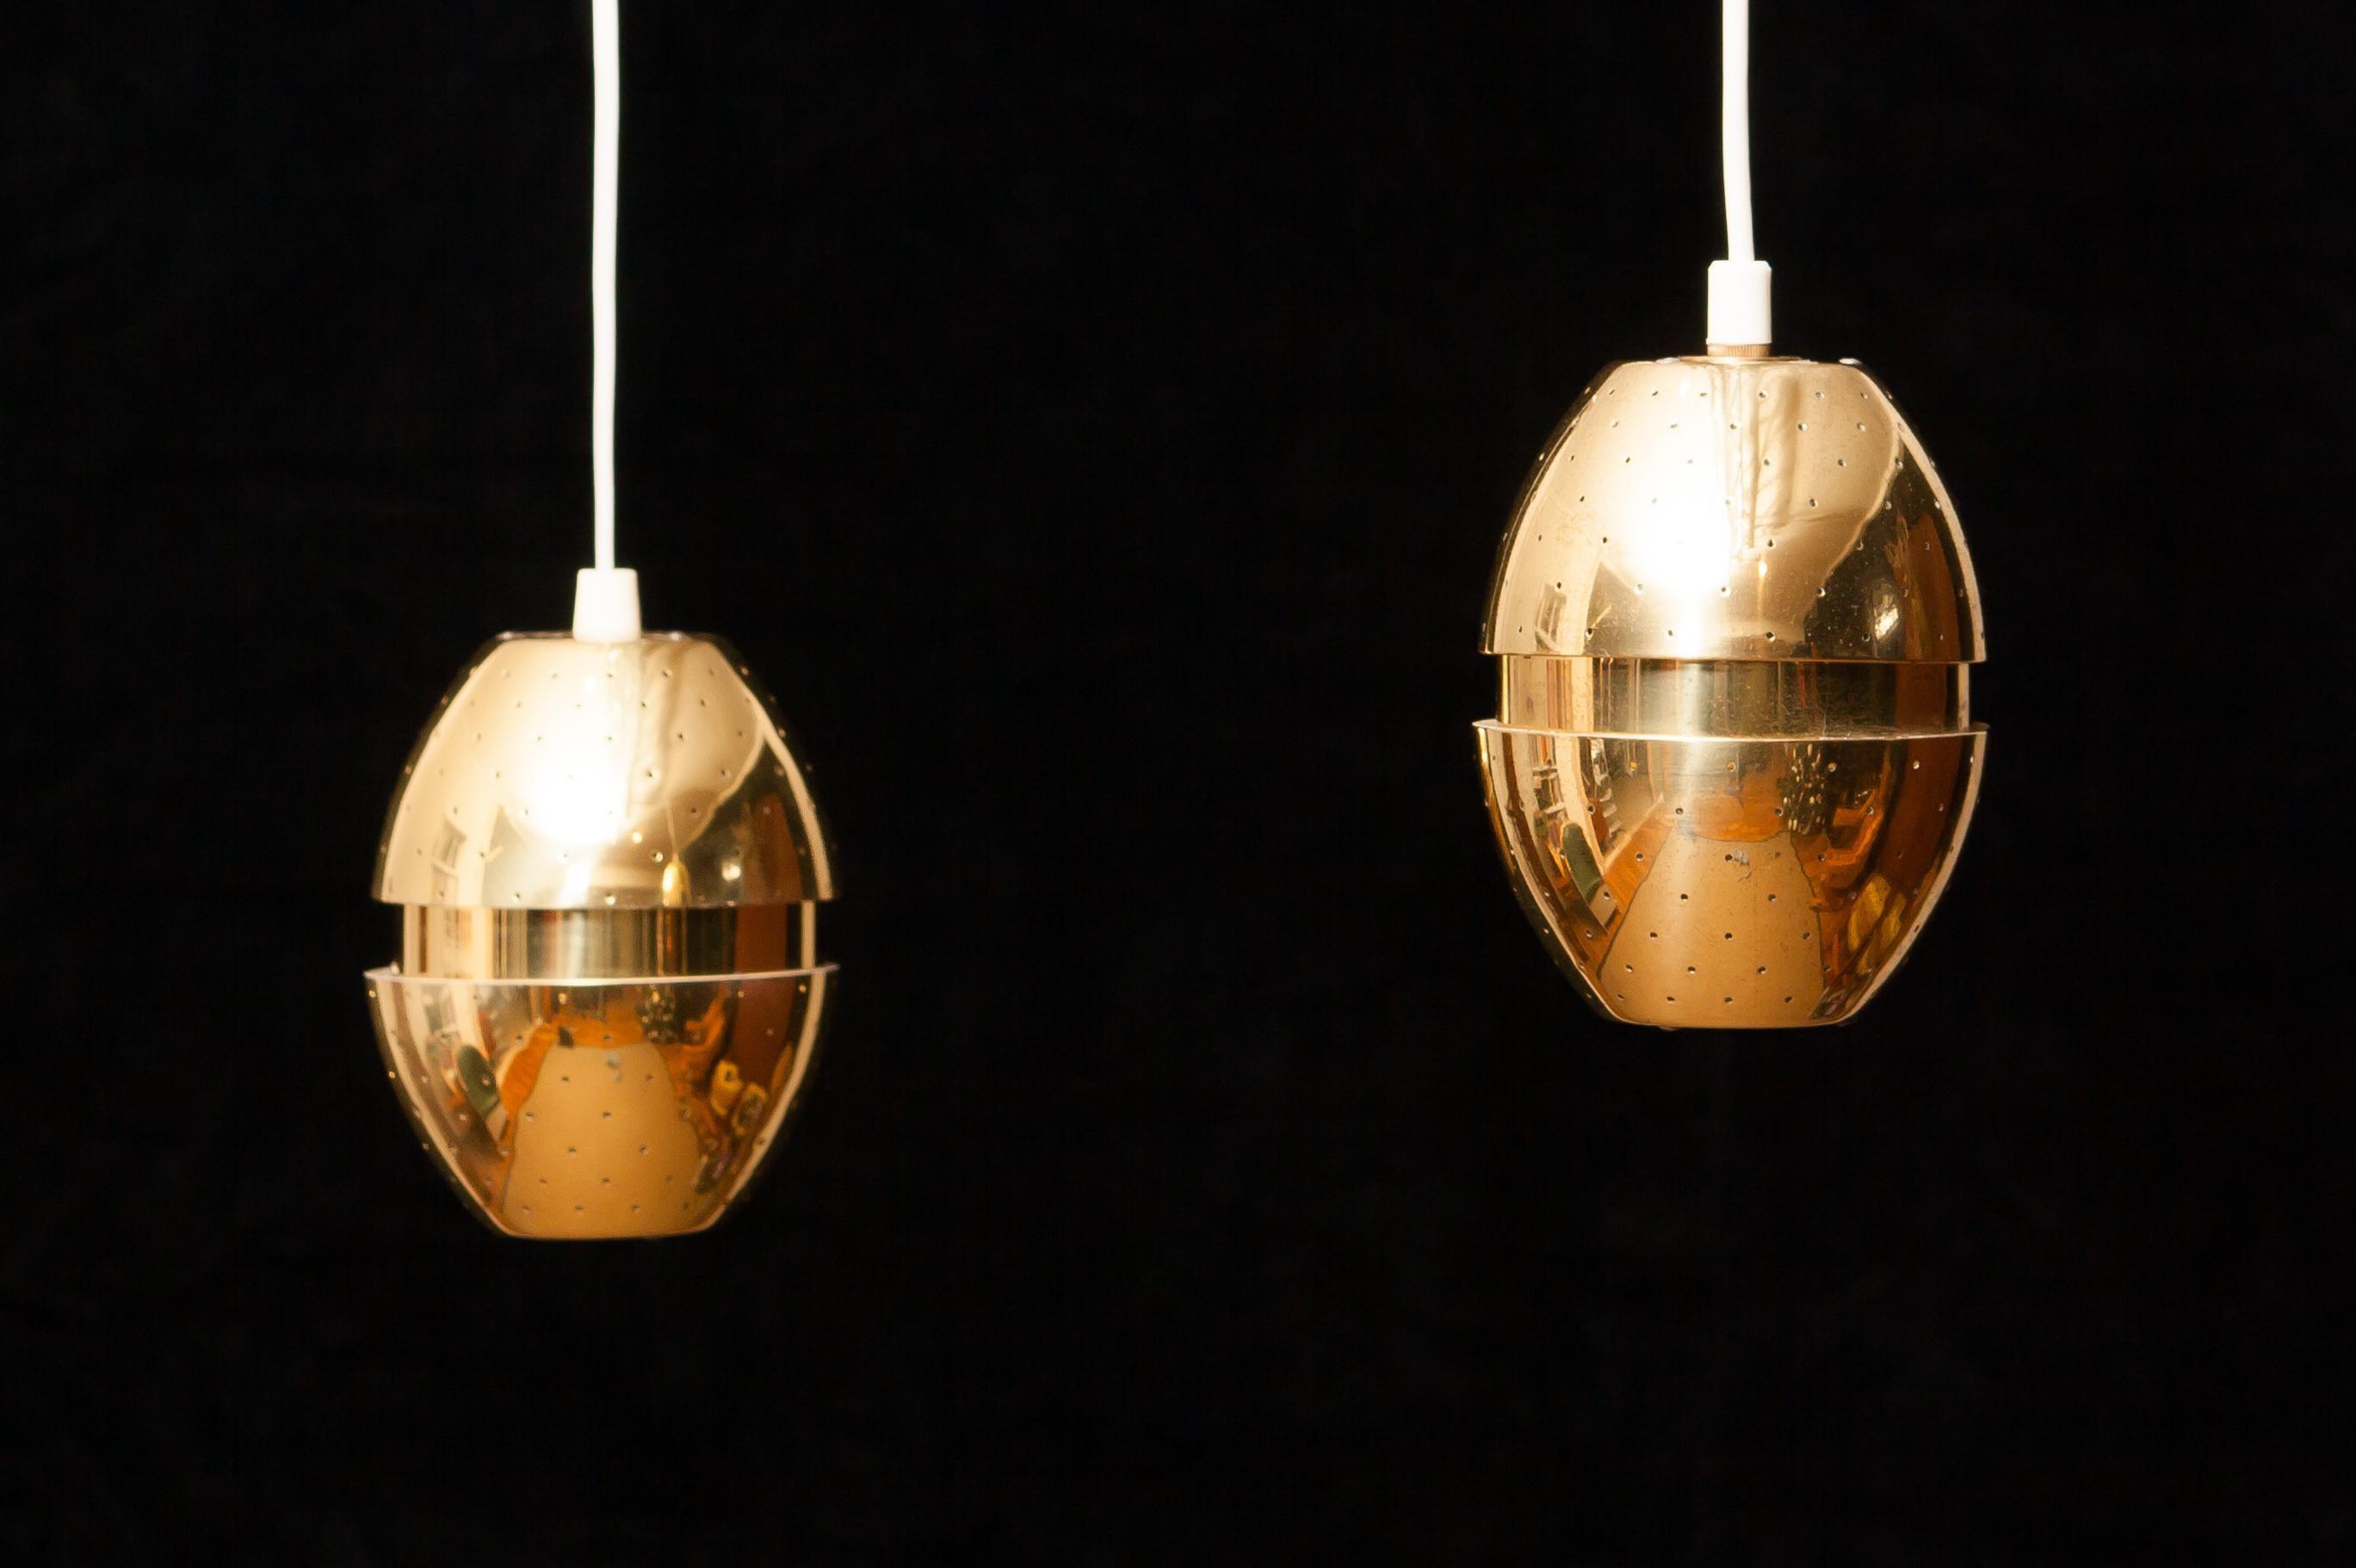 A beautiful pair of pendant lights designed by Hans-Agne Jakobsson, Sweden.
These lamps are made of brass and are perforated with gives a very nice shining.
They are in excellent condition.
Period 1950s
Dimensions: H 14 cm, ø 12 cm.